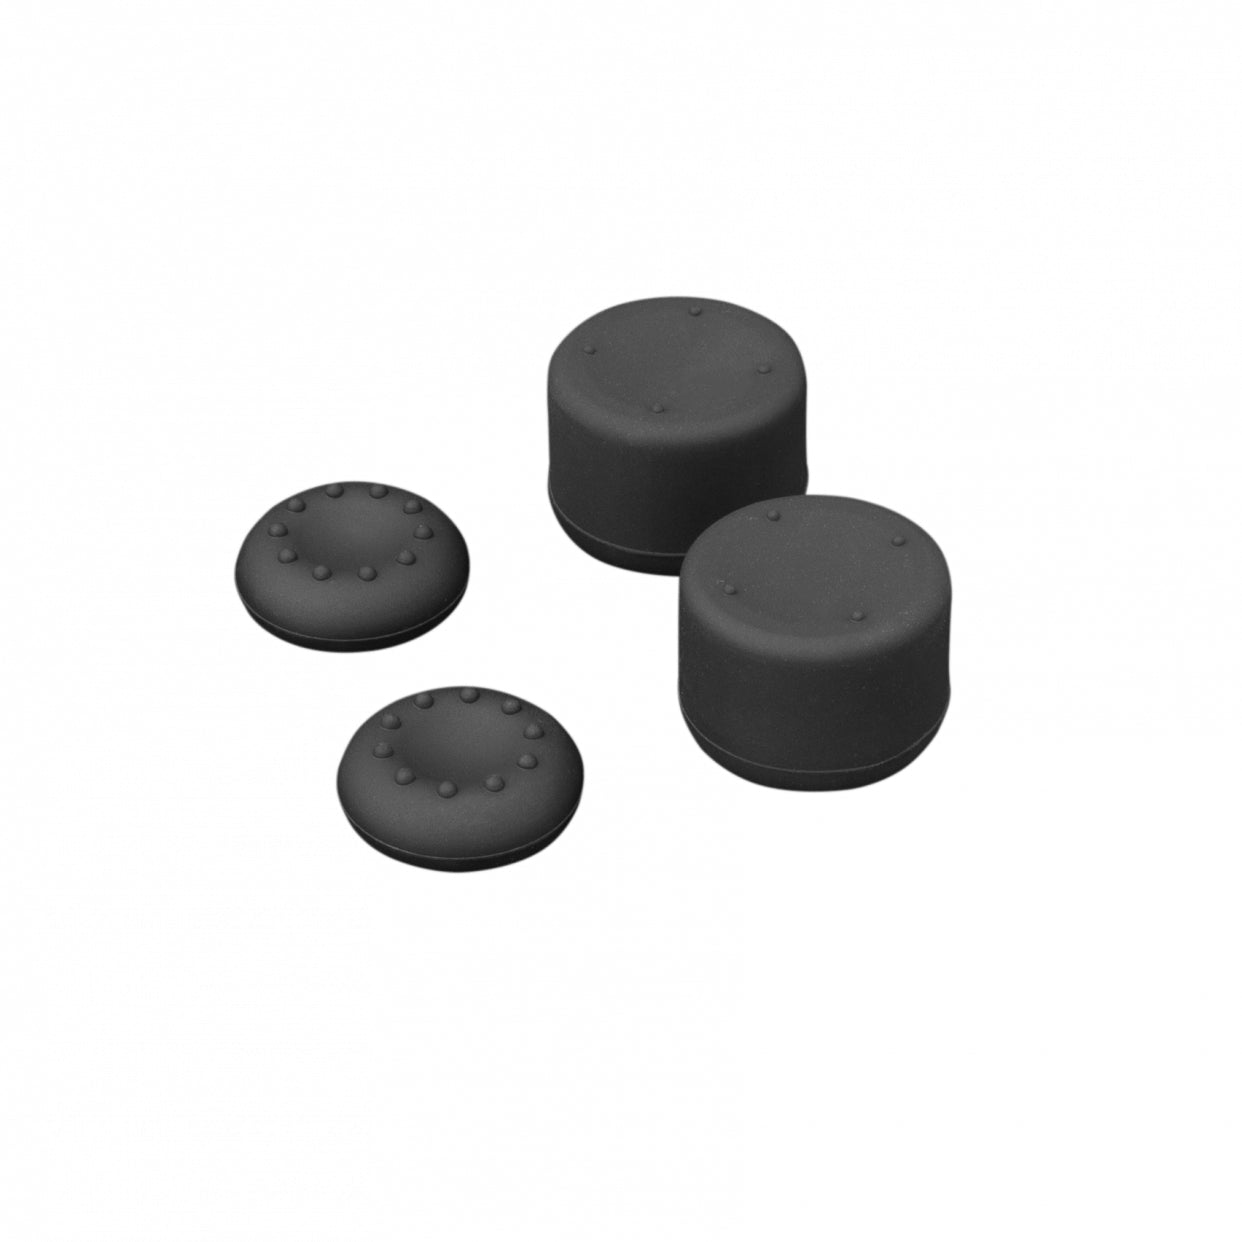 White Shark PS5-817 Wheezer Black Silicone Thumb Grips for PS5 Controller, Black